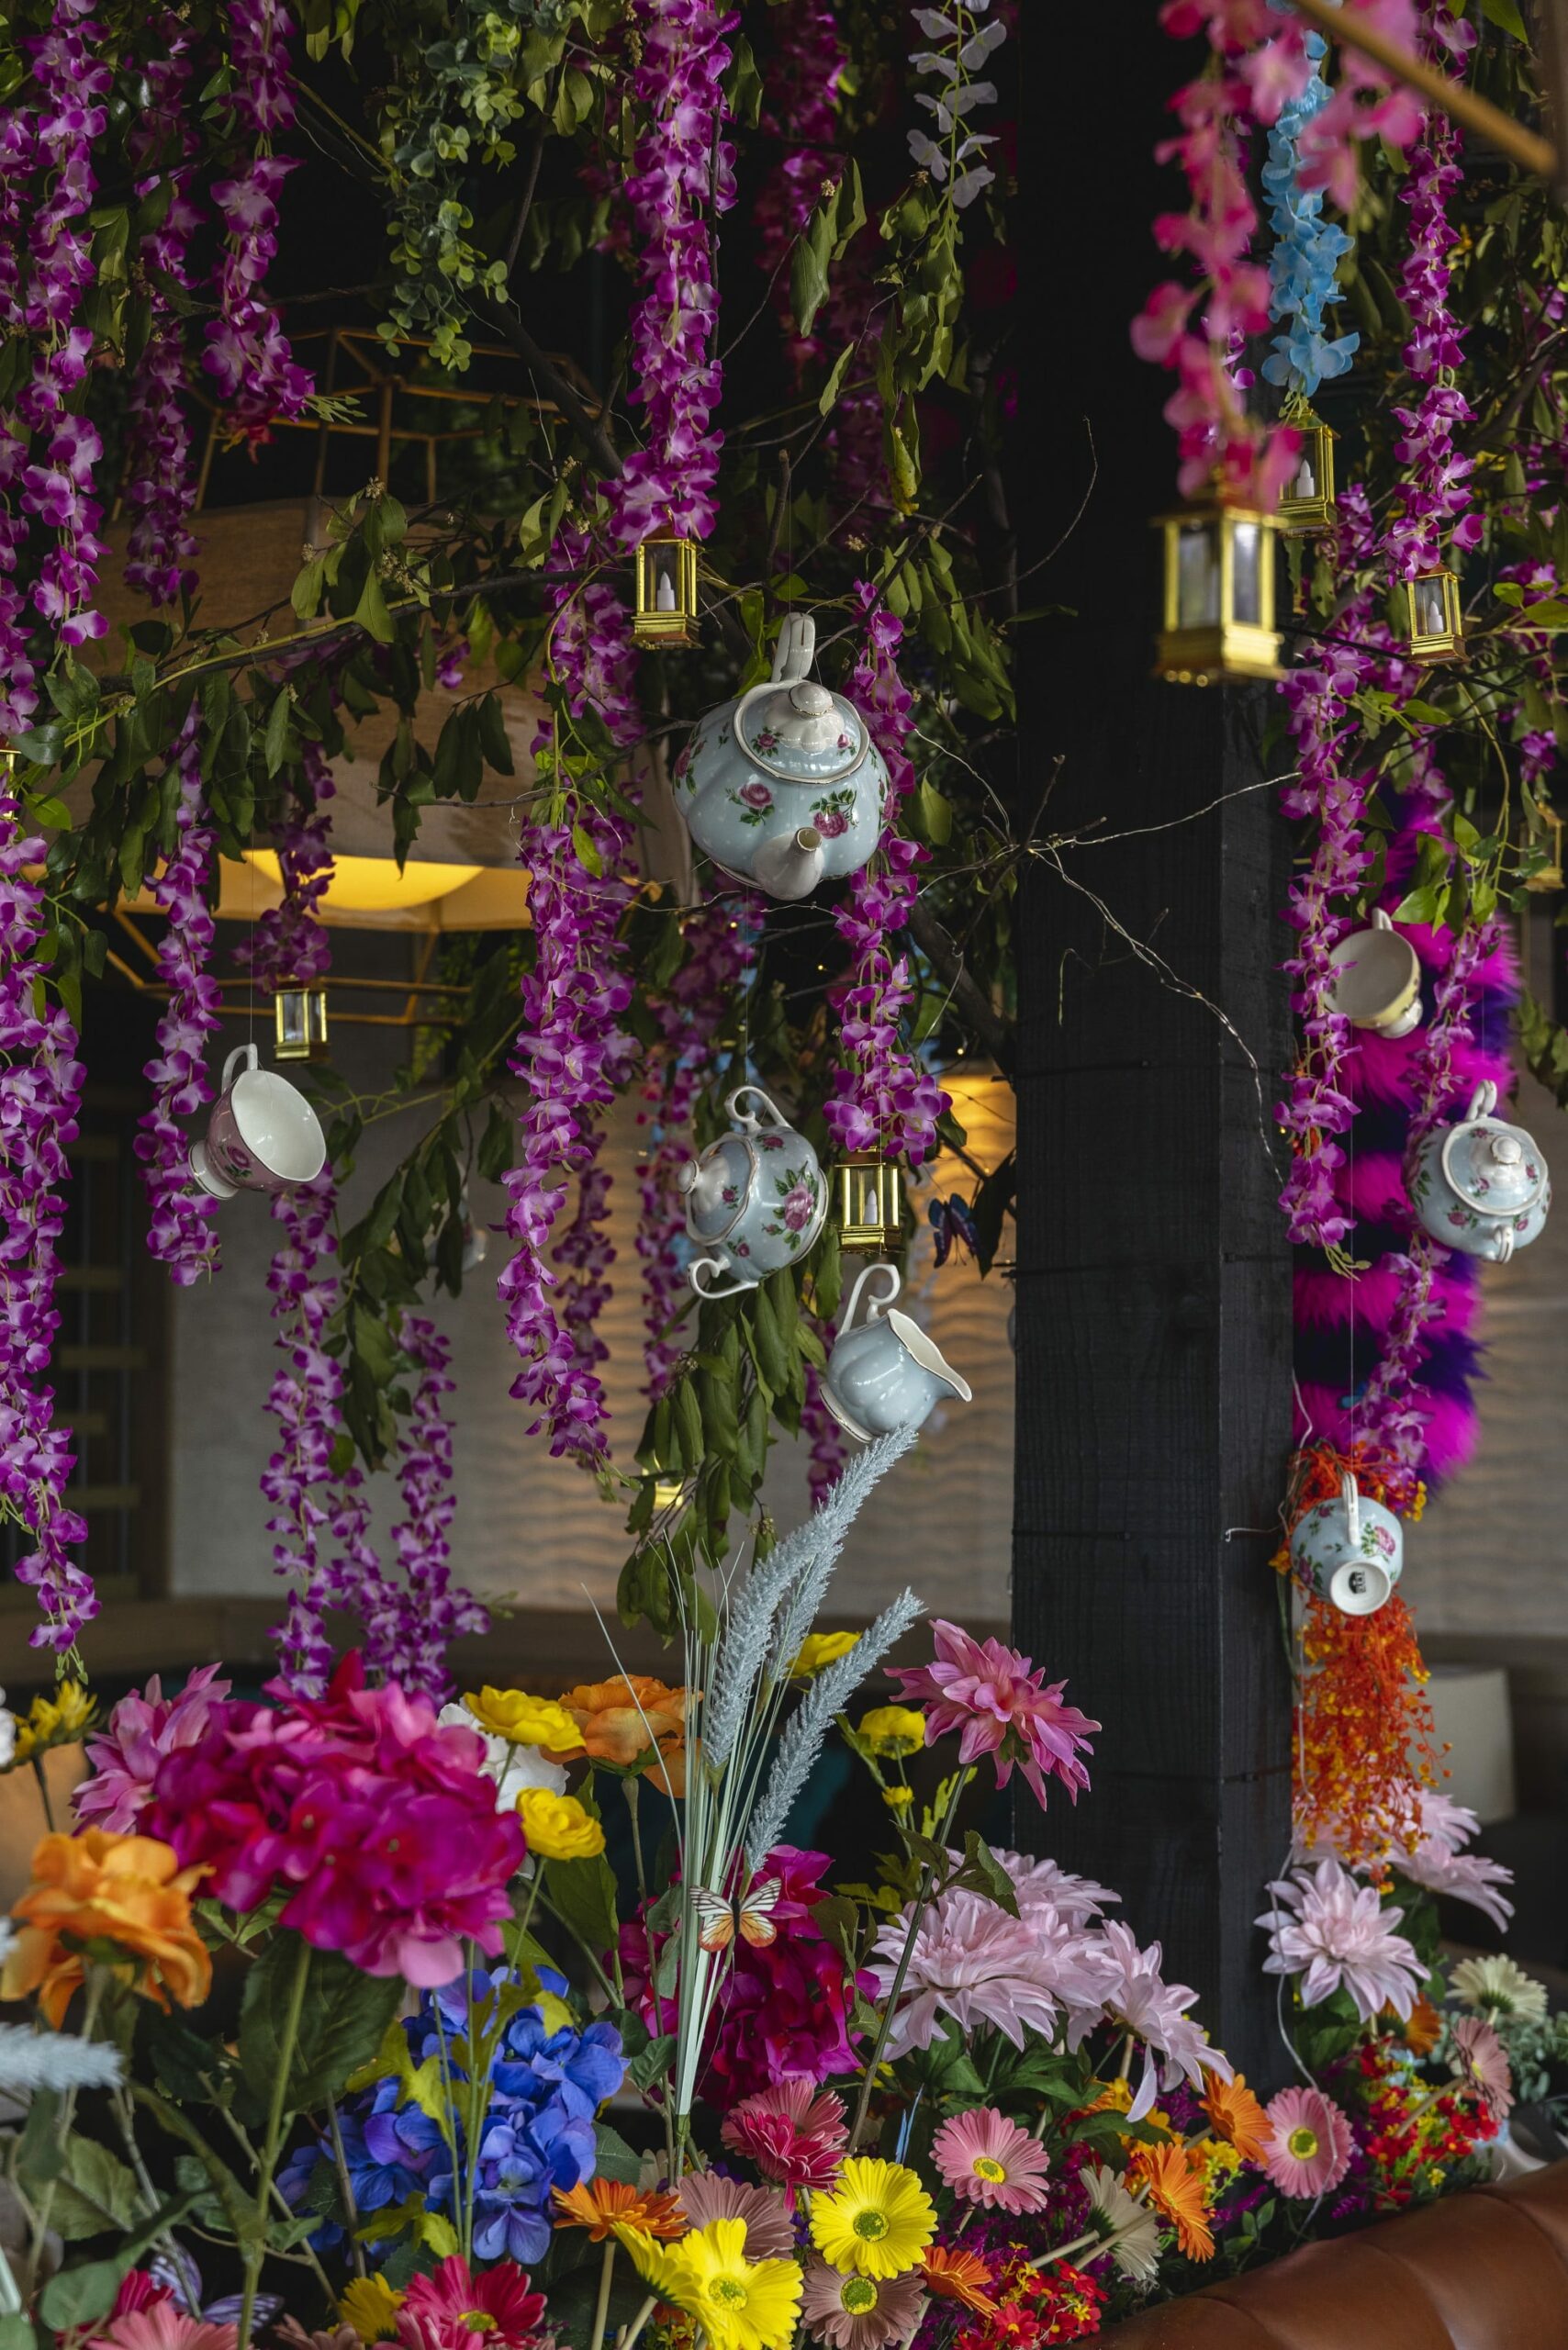 An image of the decor for The Green Room's Through the Looking Glass pop-up. The photo has tea pots, colorful flowers and the famous Cheshire cat.